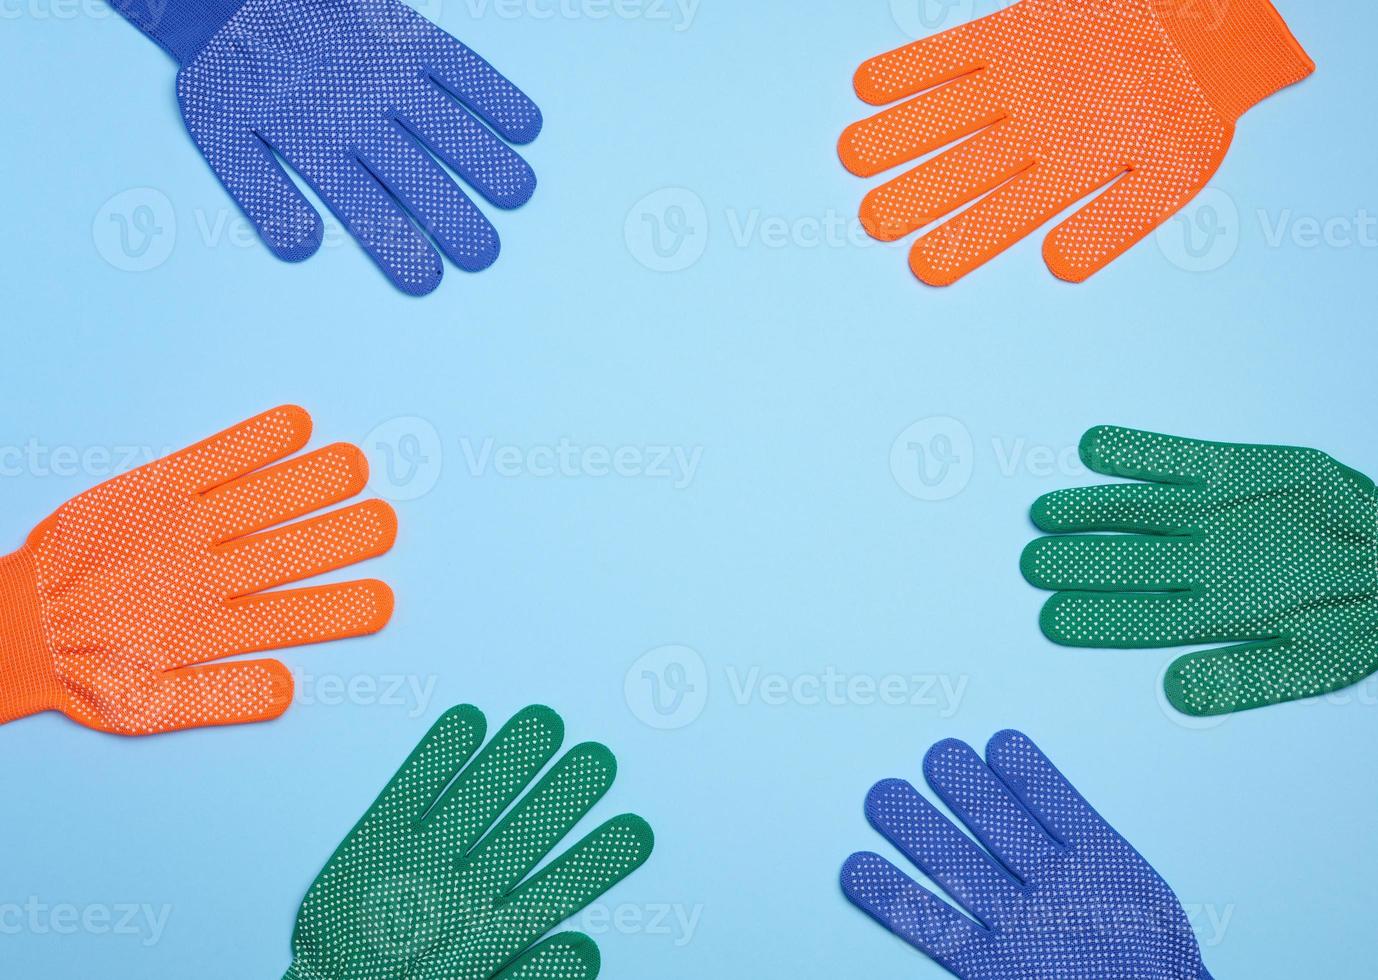 Textile work gloves on a blue background. Protective clothing for manual workers, top view photo